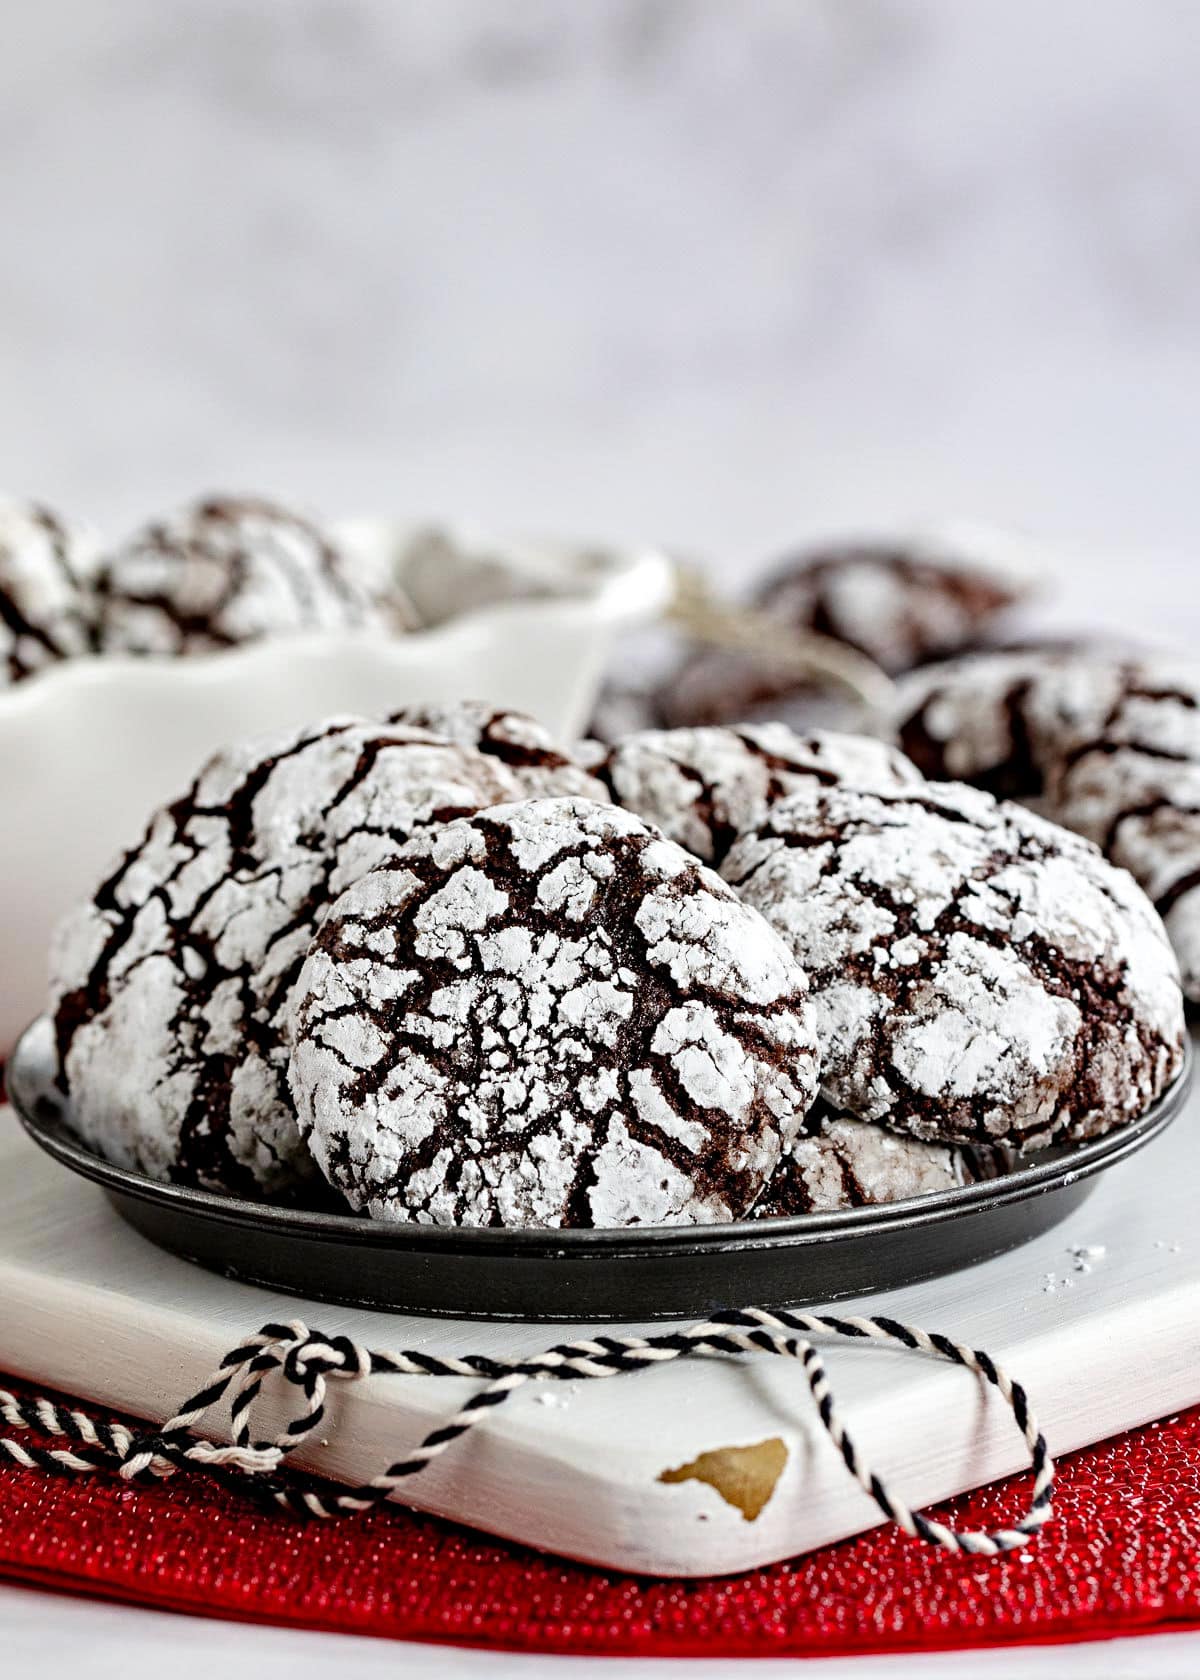 plate of chocolate crinkle cookies sitting on white wood board on red sparkly placemat. black and white twine sitting on board and more cookies can be seen in the background.